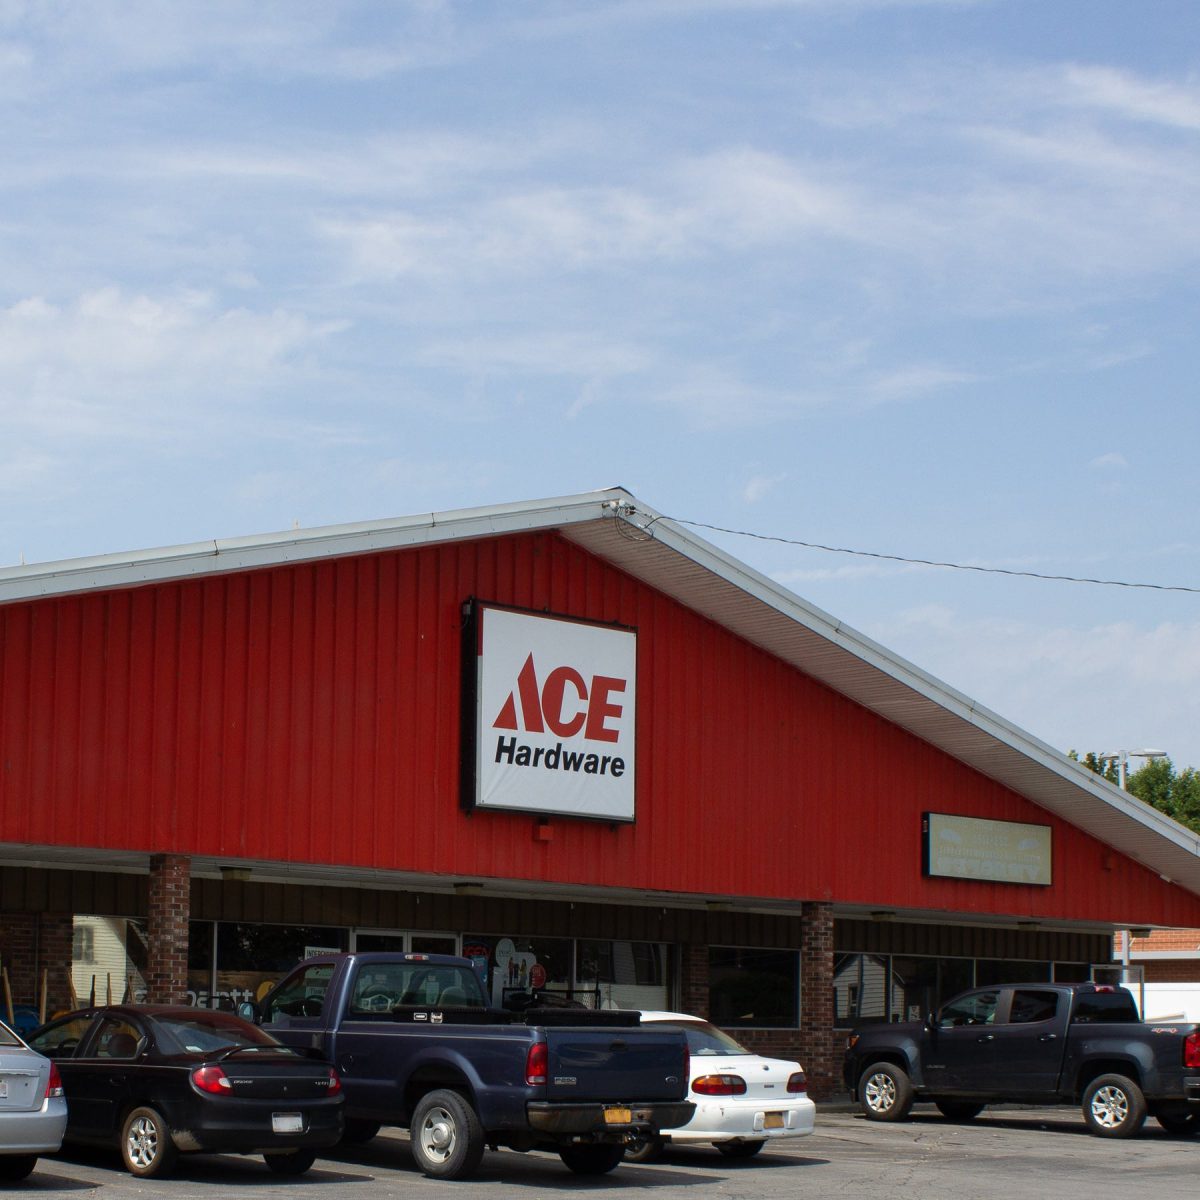 The image depicts a red building with several cars parked in front of it. The building has a sign that reads 